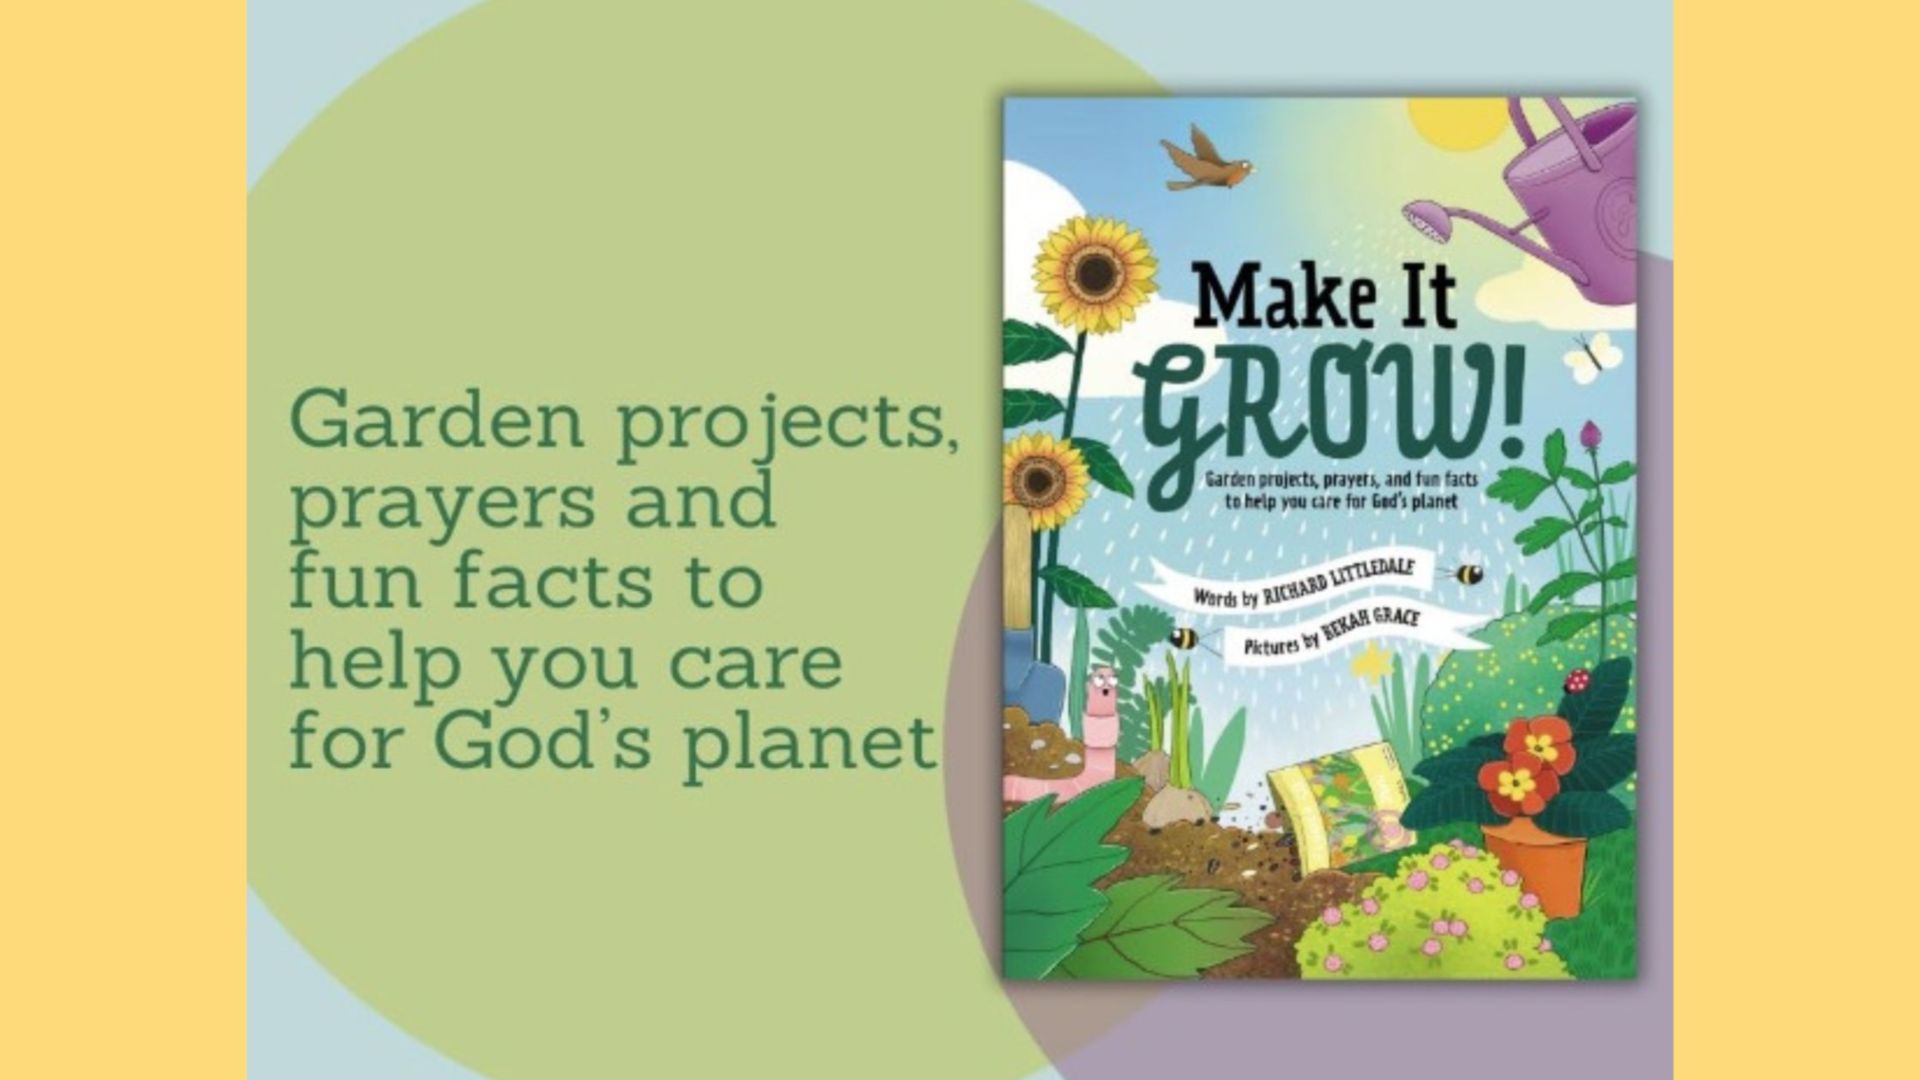 An interview with Richard Littledale, author of 'Make it Grow!'